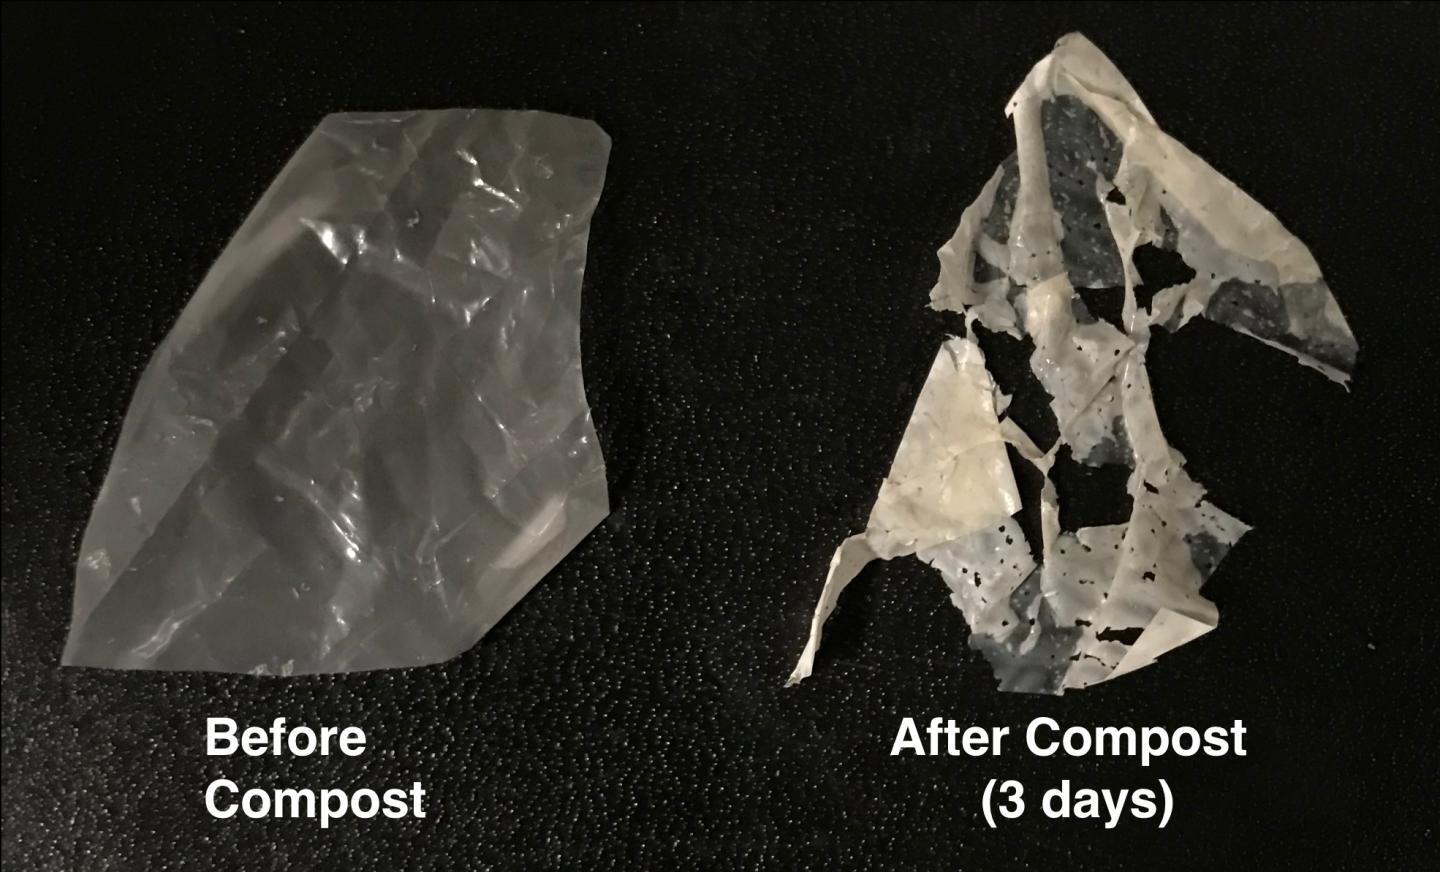 Polymer degradation in compost